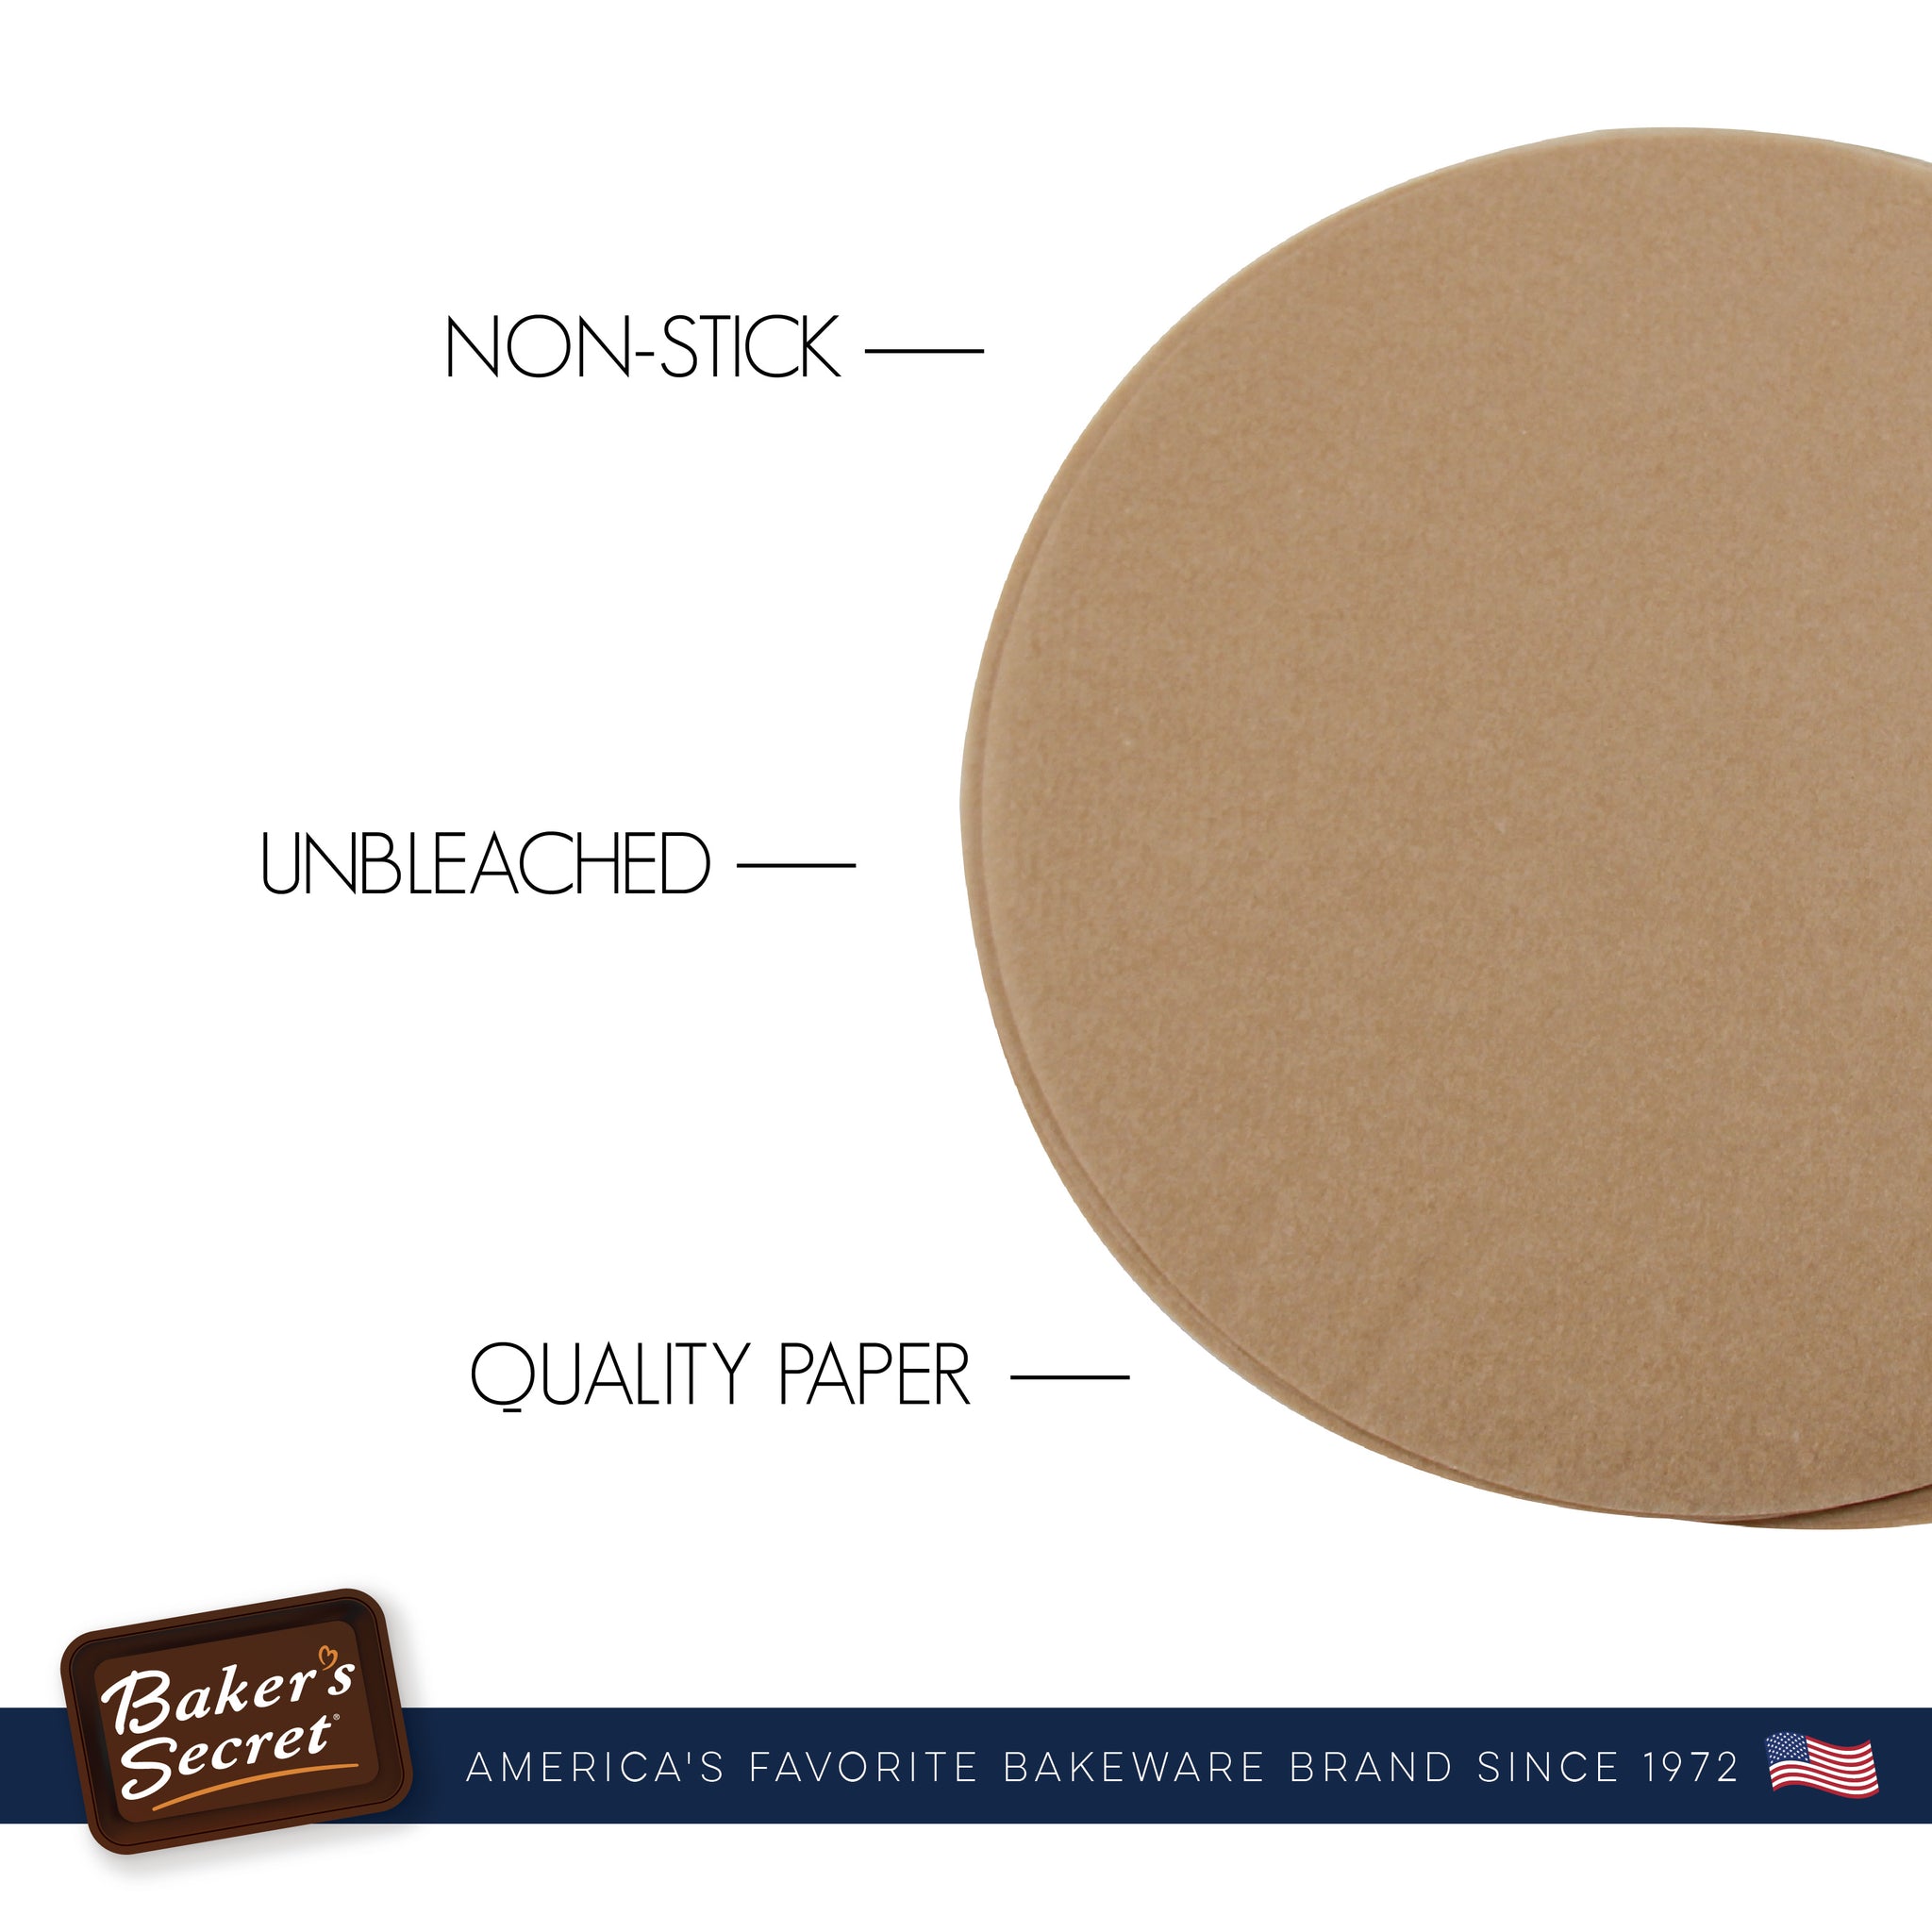 Parchment Paper Baking Sheets by Baker's Signature | Precut Silicone Coated  & Unbleached – Will Not Curl or Burn – Non-Toxic & Comes in Convenient